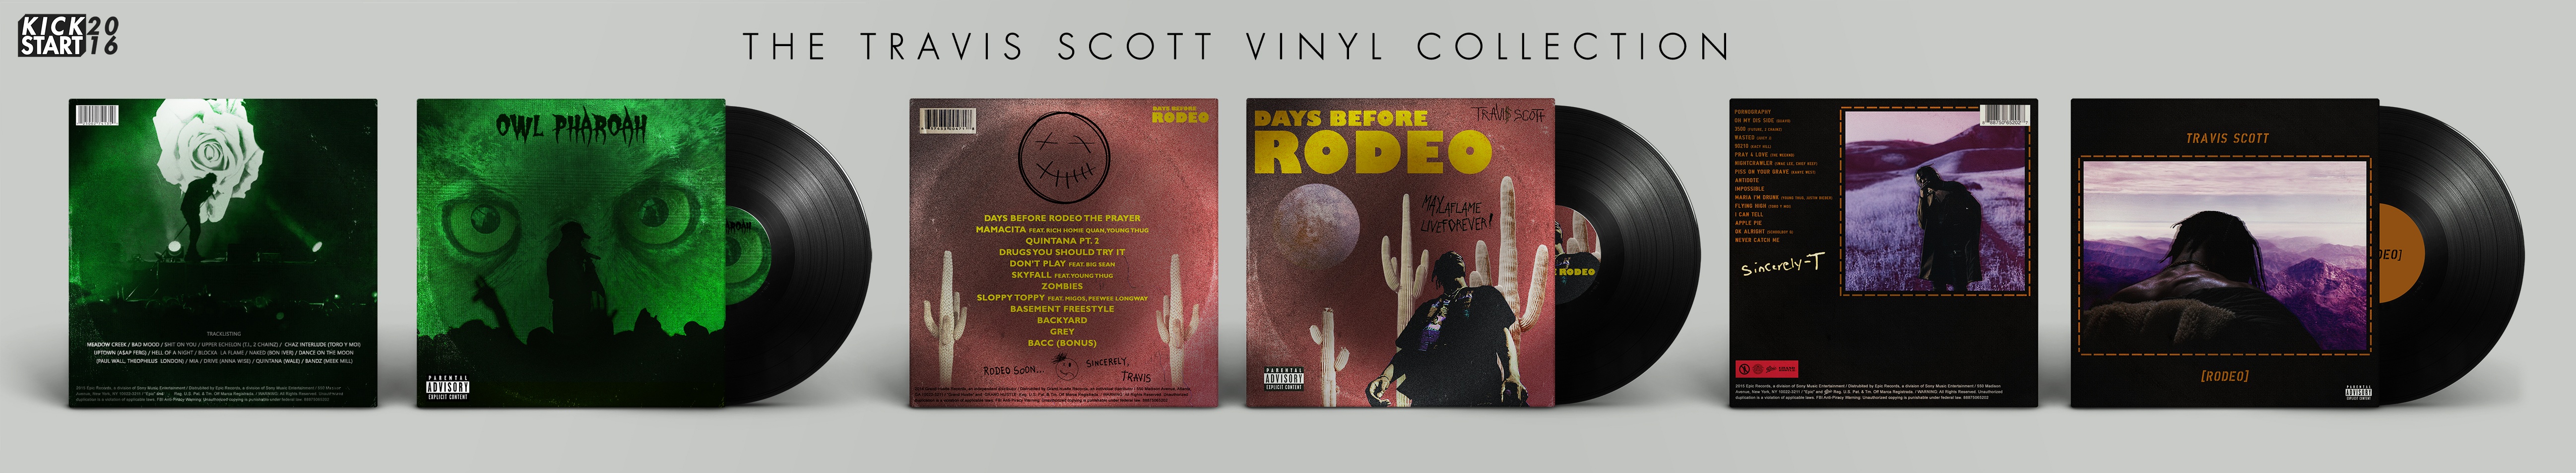 Travis Scott: The Collection box cover